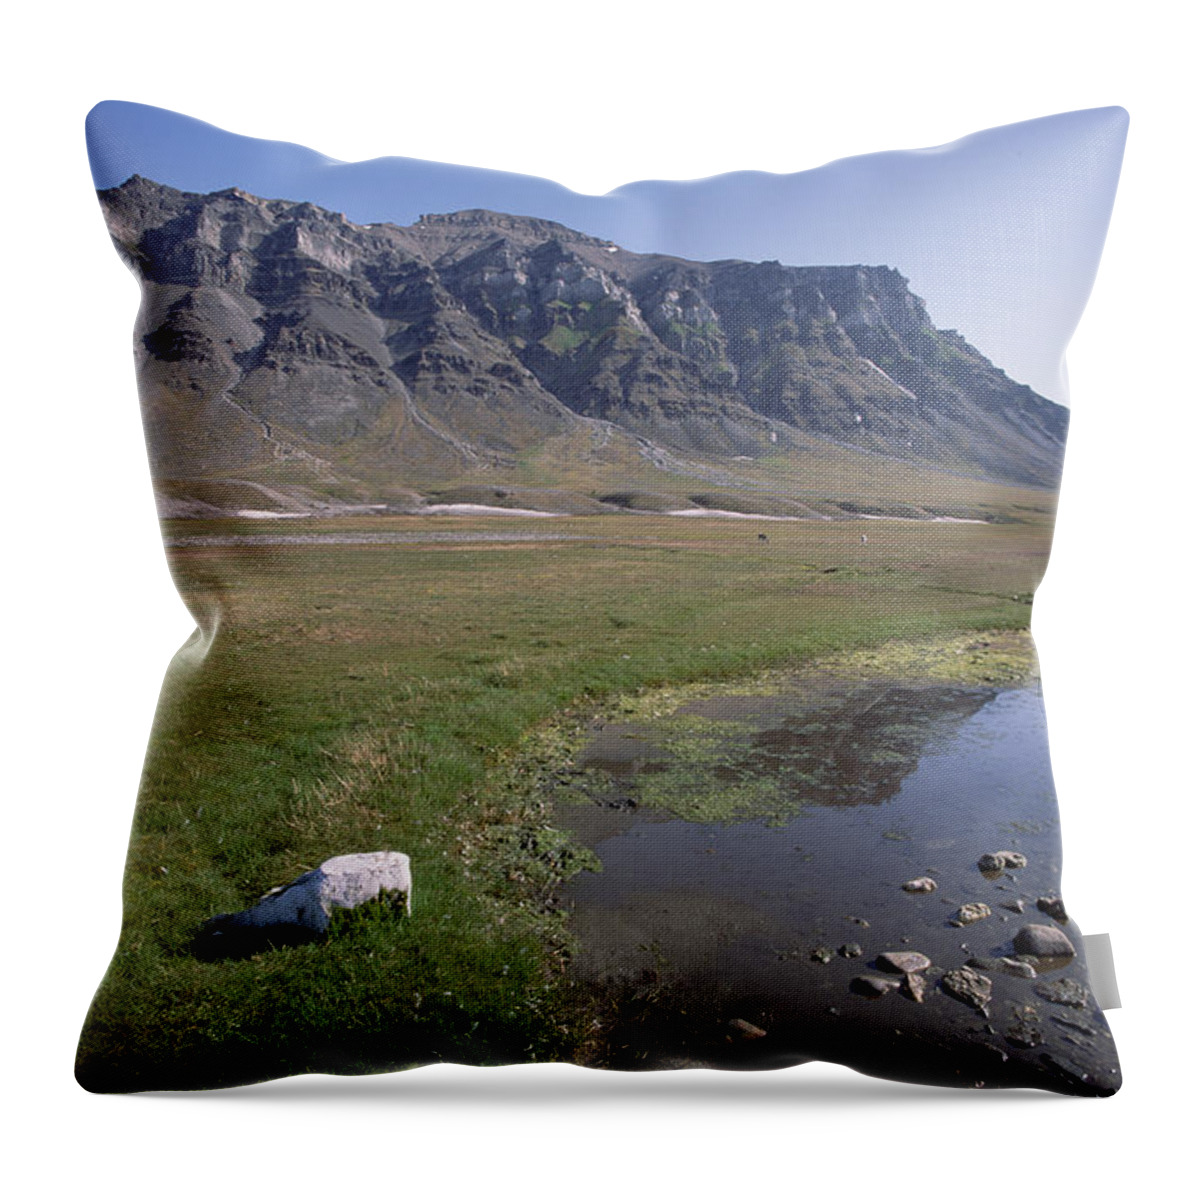 Feb0514 Throw Pillow featuring the photograph Svalbard Reindeer In Arctic Meadow by Tui De Roy